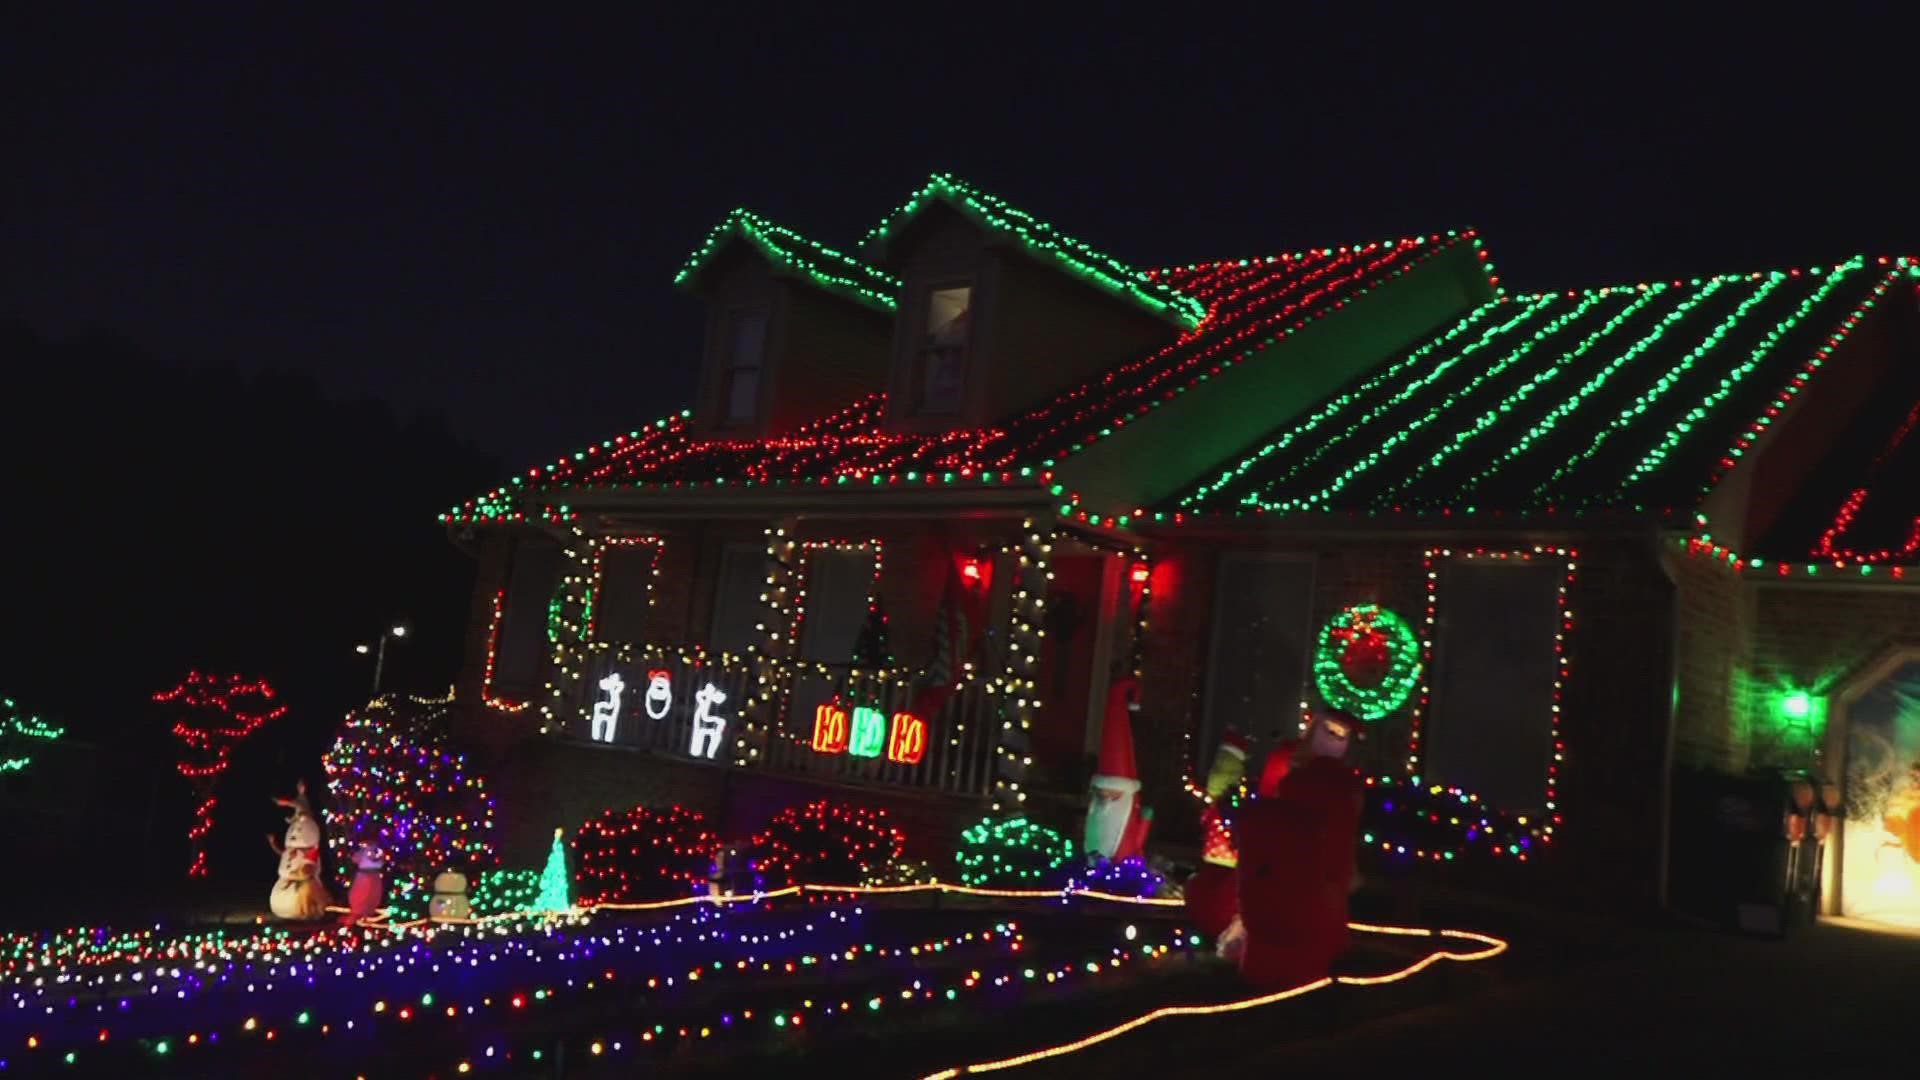 The Saunders home pulled out all the stops this Christmas season! We look into why they shine their lights every year.